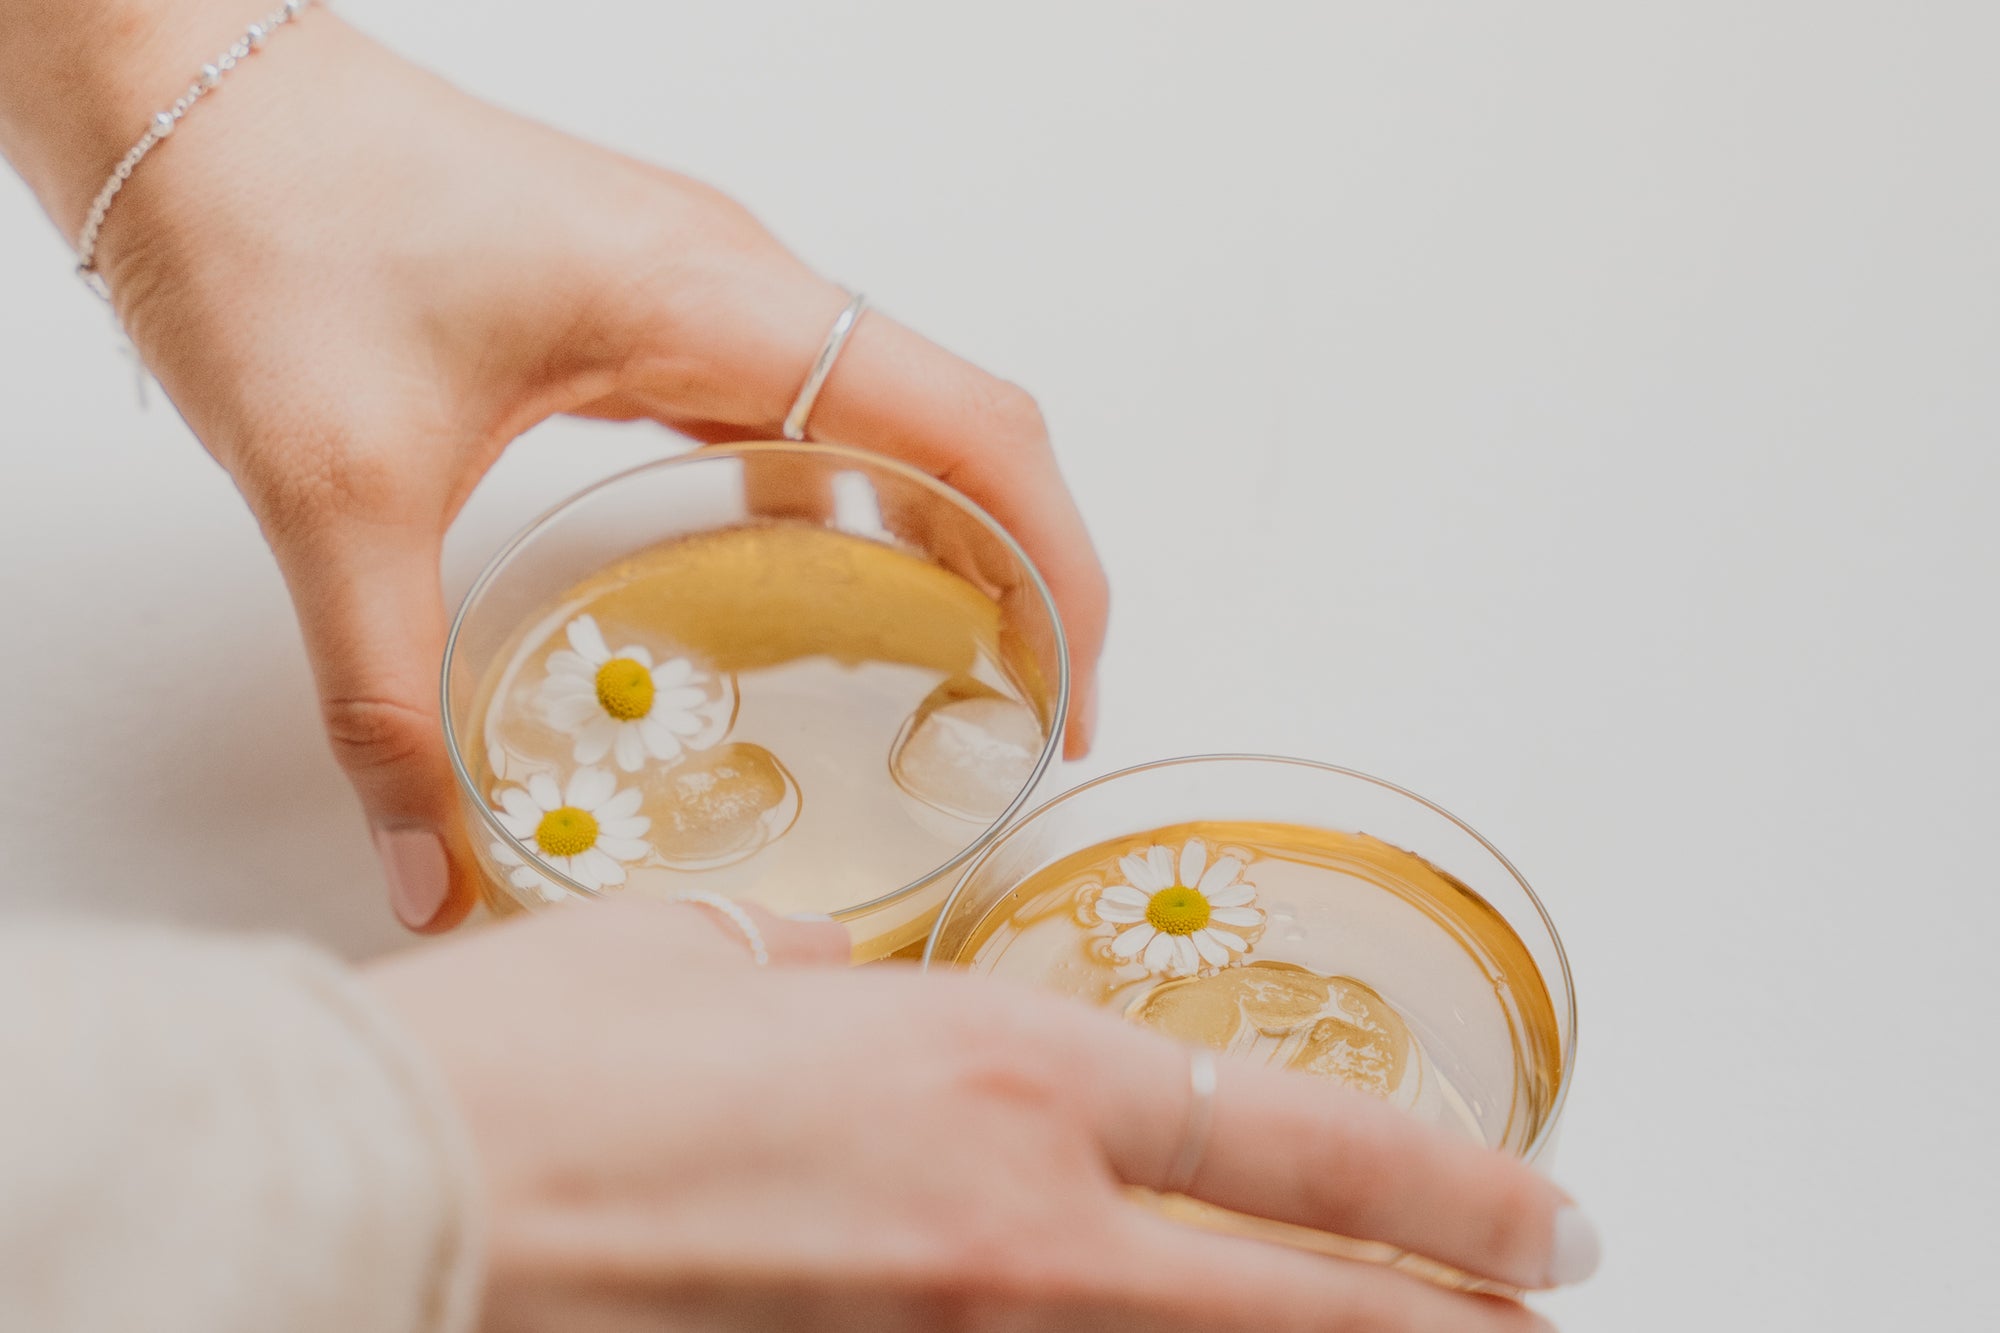 Woman's hands holding two cups of tea with daisies in them